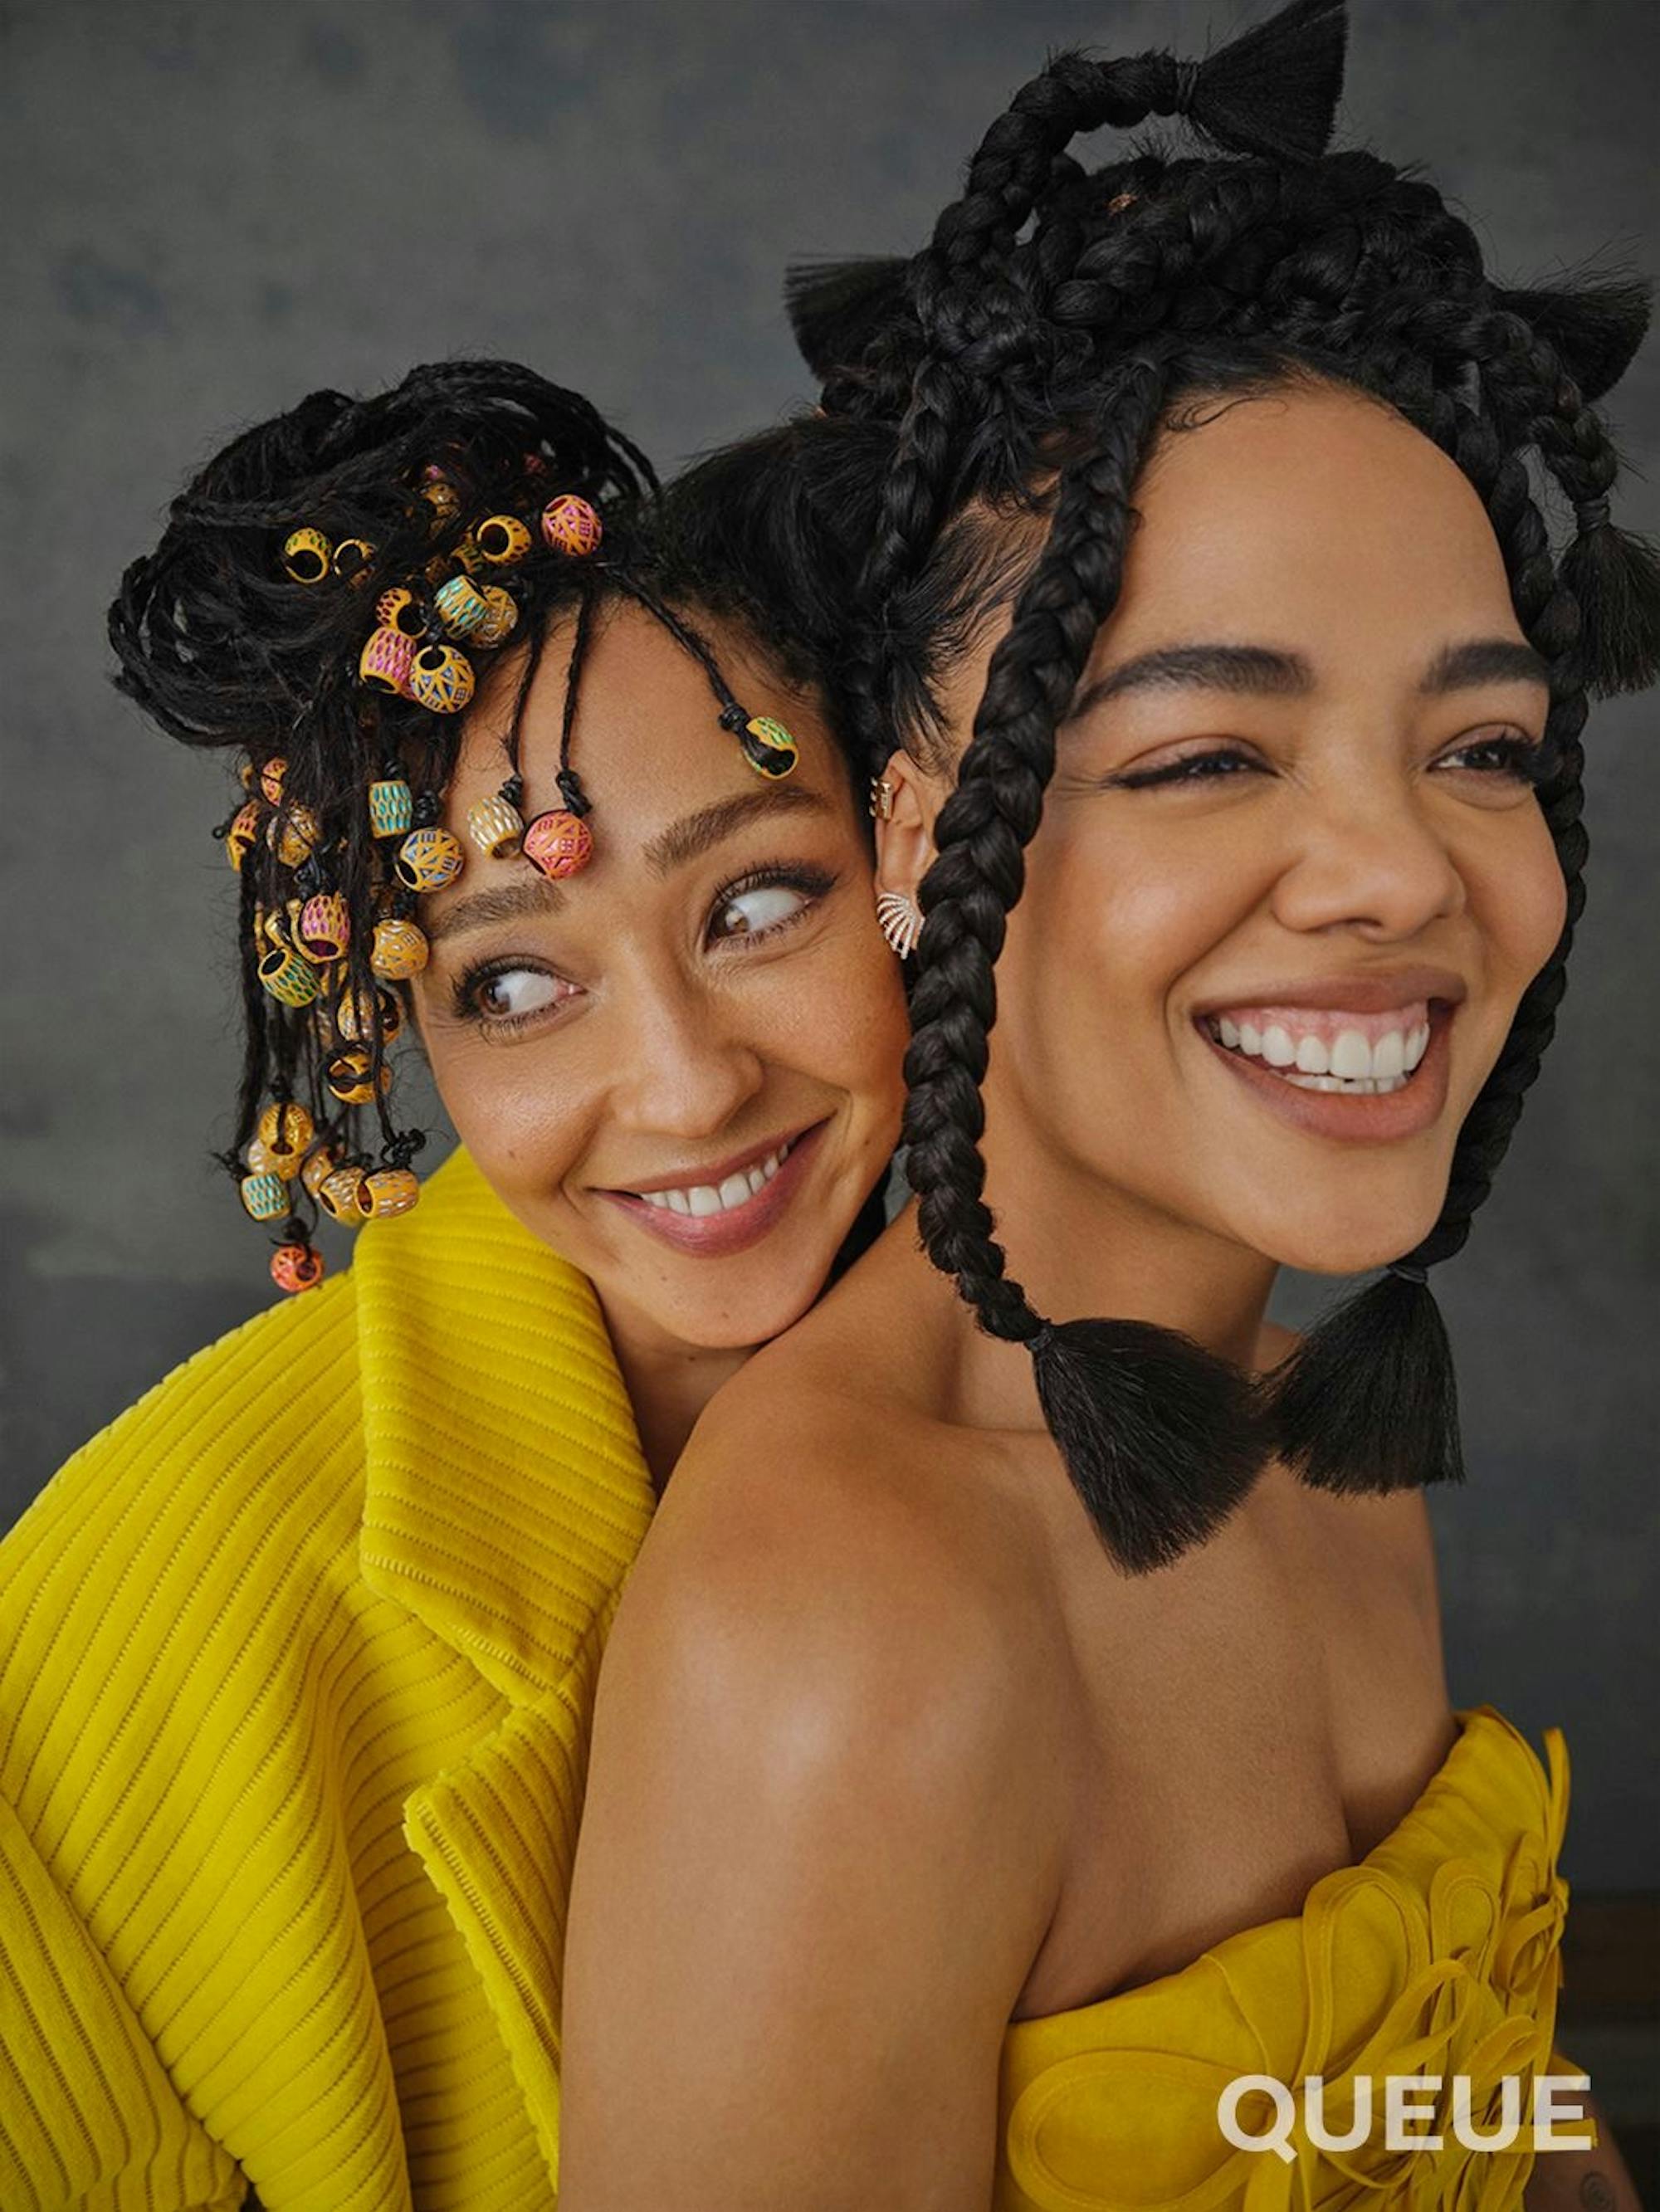 Ruth Negga wears a yellow coat and smiles as she stands behind Tessa Thomspon. Thompson also wears a yellow top and has a big grin.